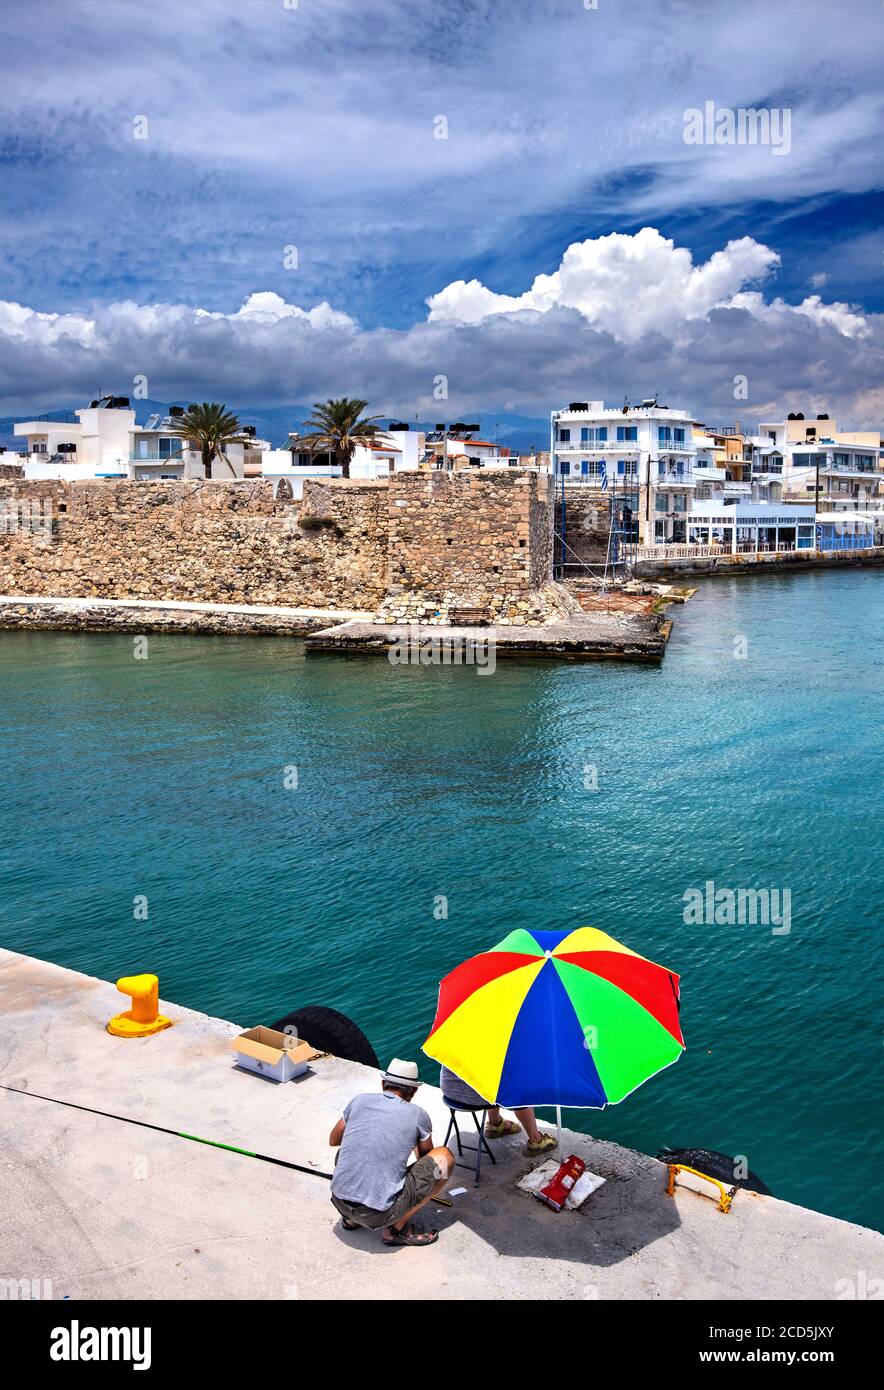 People fishing at the entrance of the old port of ierapetra town, Crete, Greece. In the background Kales castle. Stock Photo